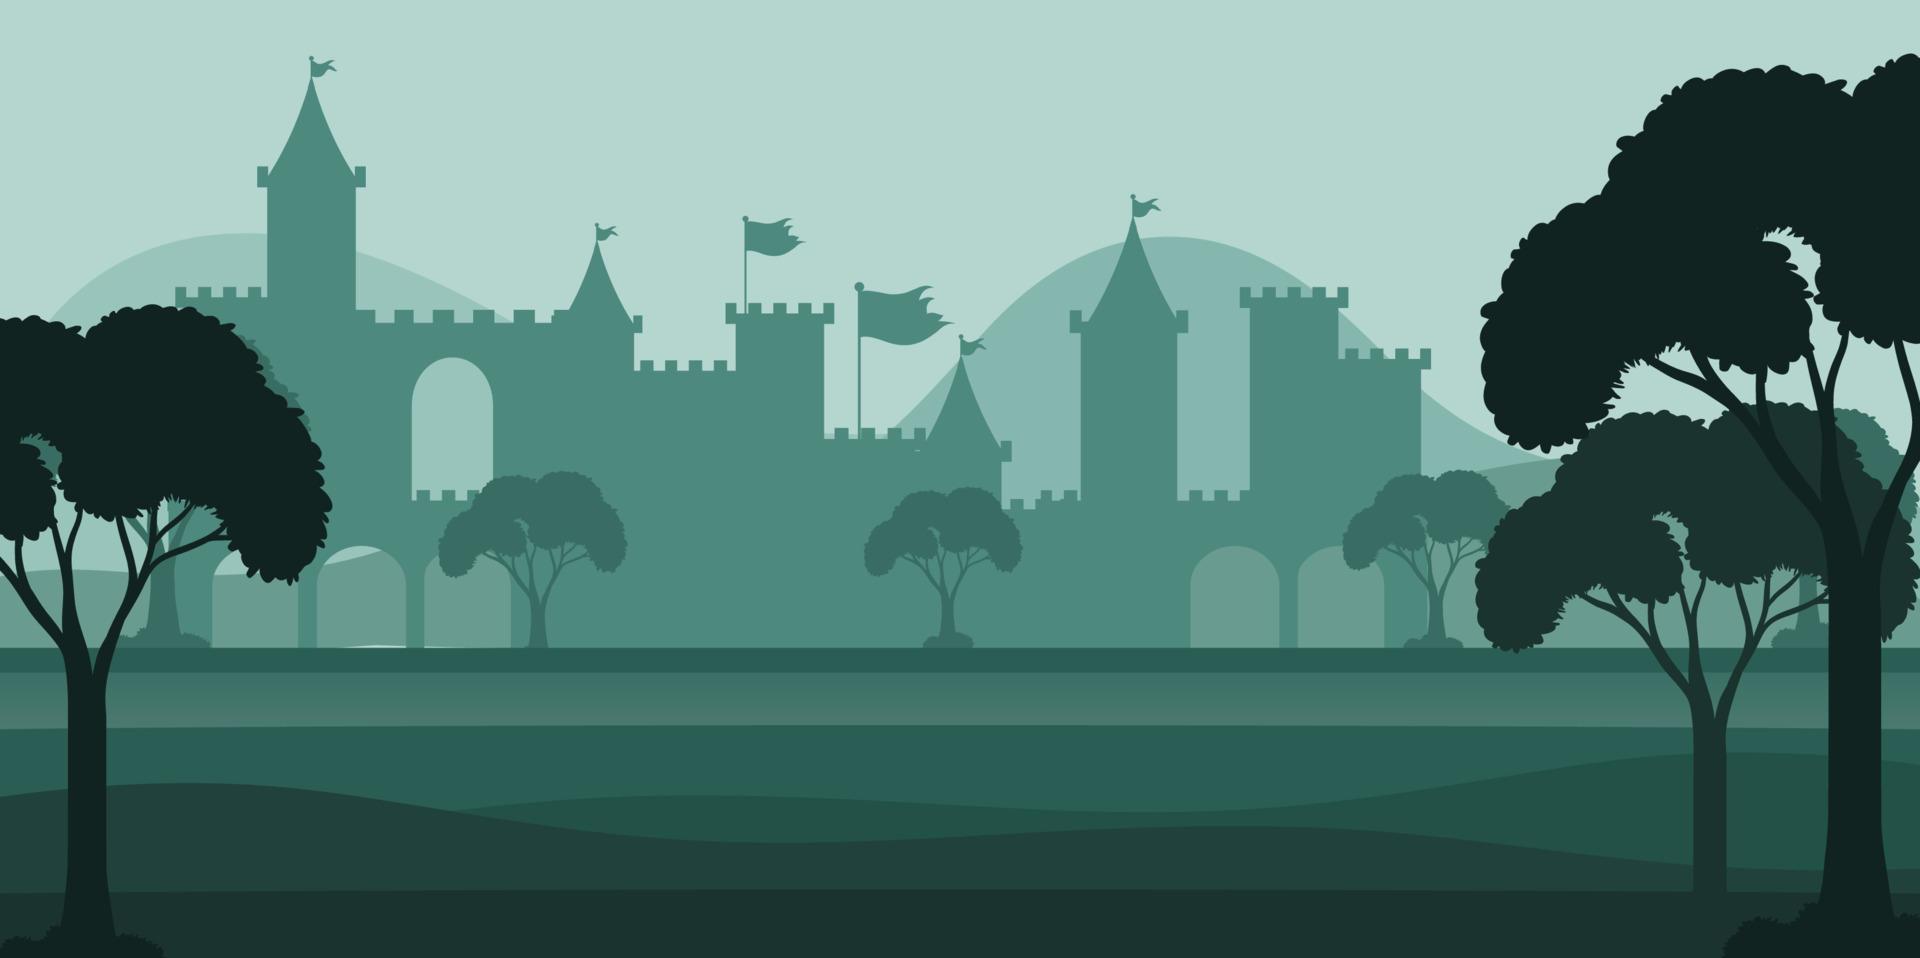 Landscape scene silhouette with medieval town vector